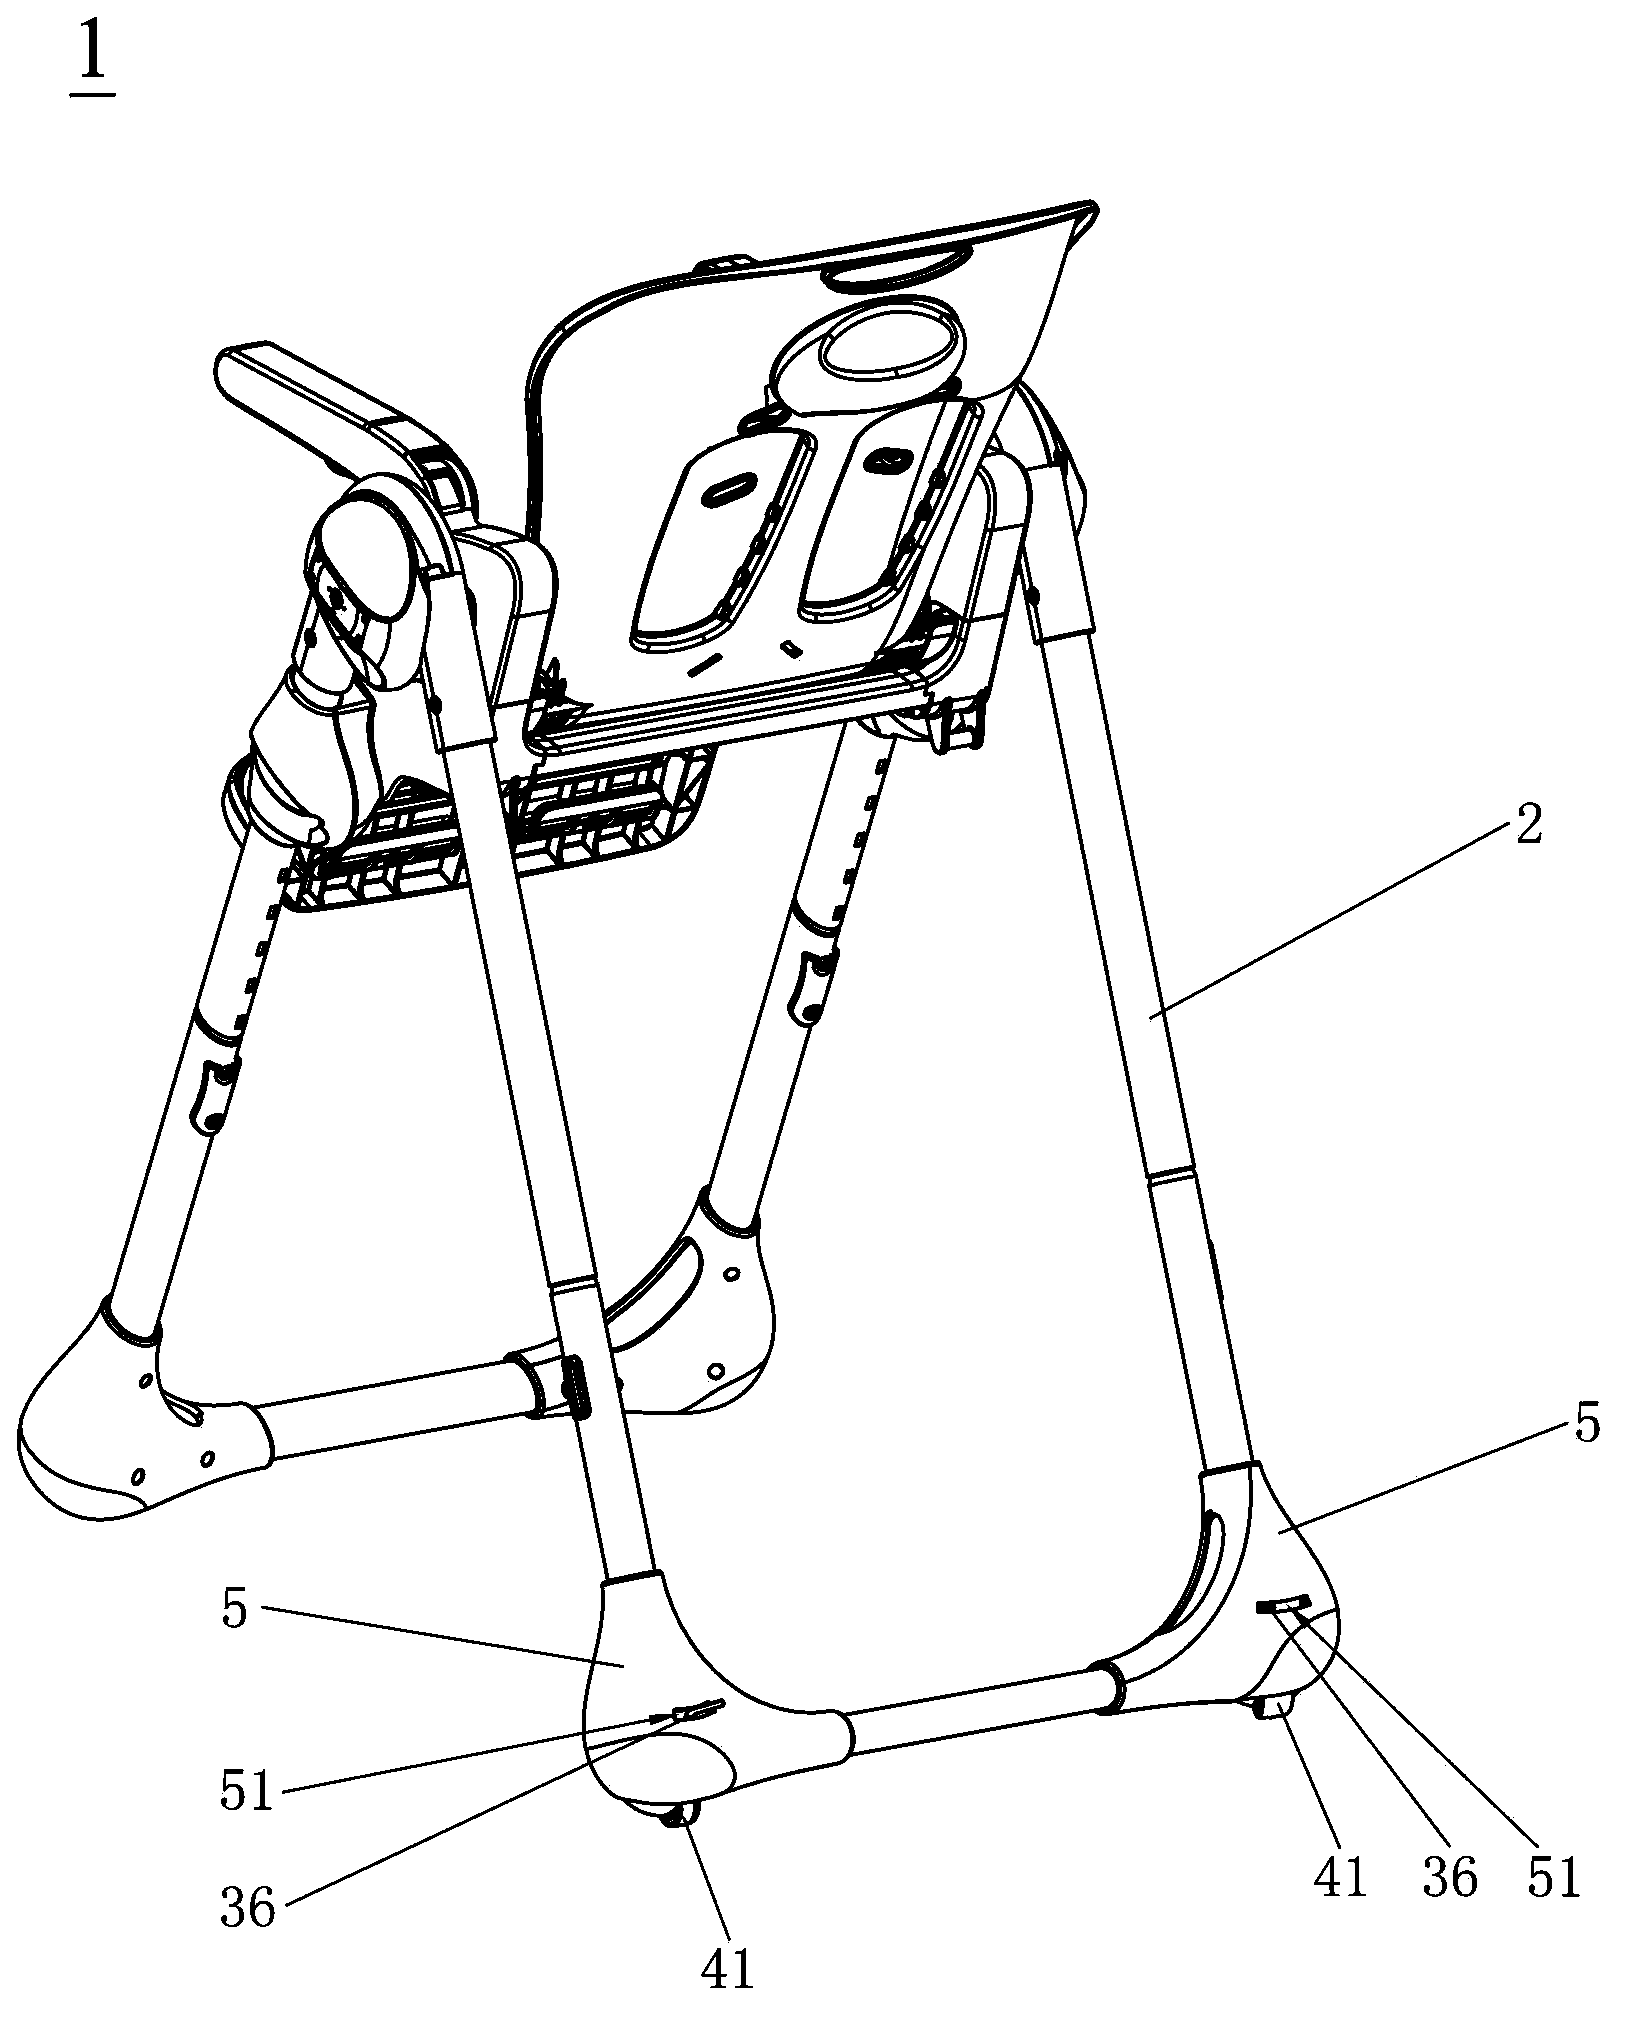 Brake mechanism and child dinning chair with brake mechanism